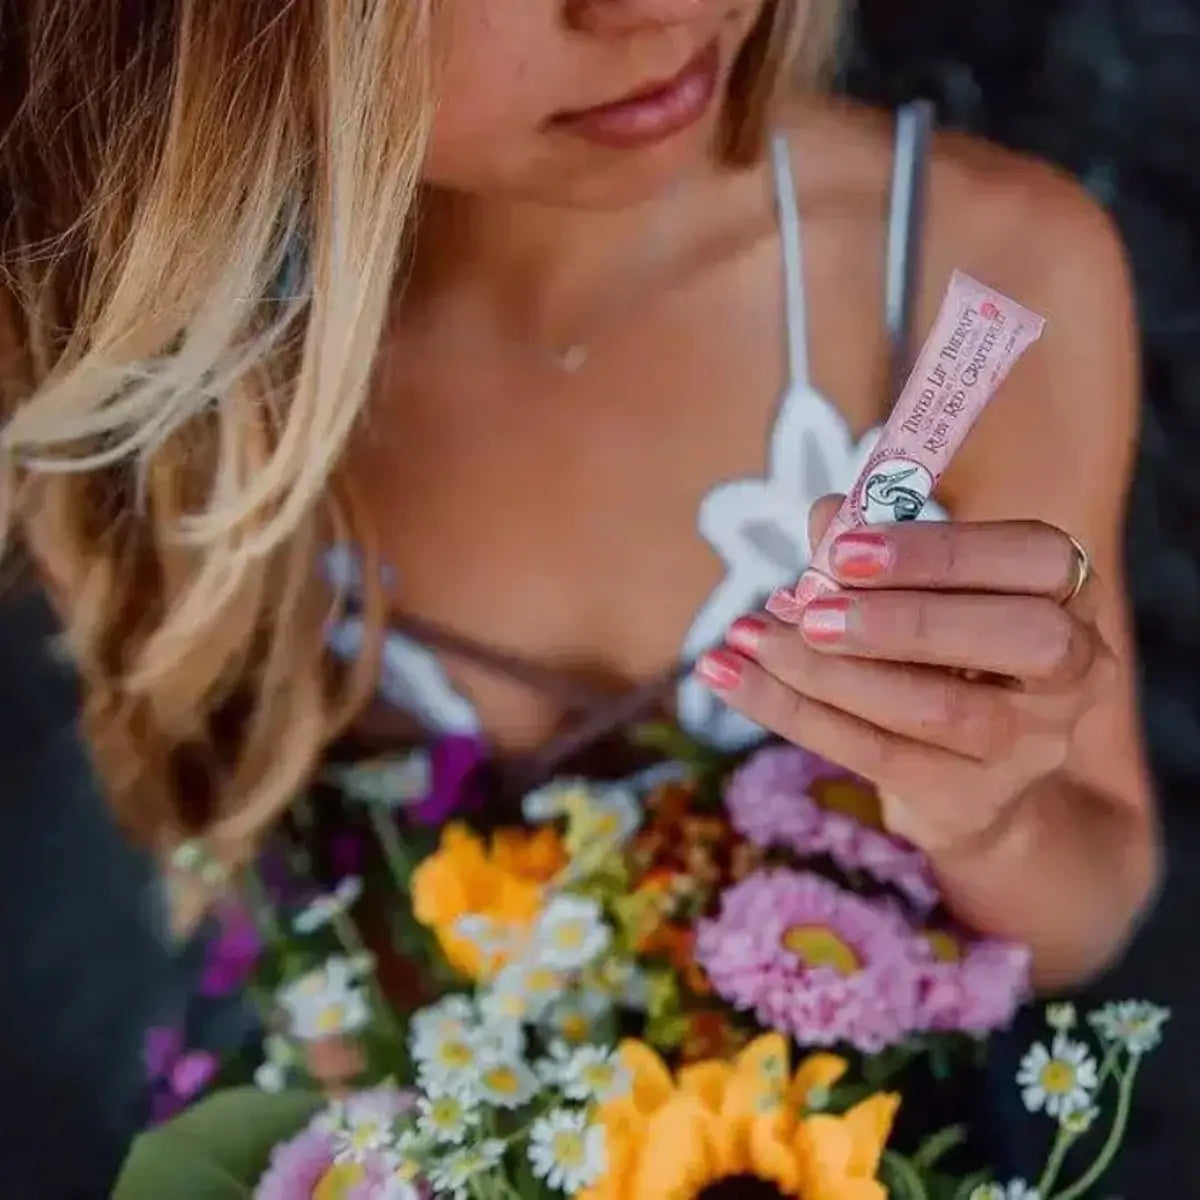 woman holding flowers and a tube of red lip balm